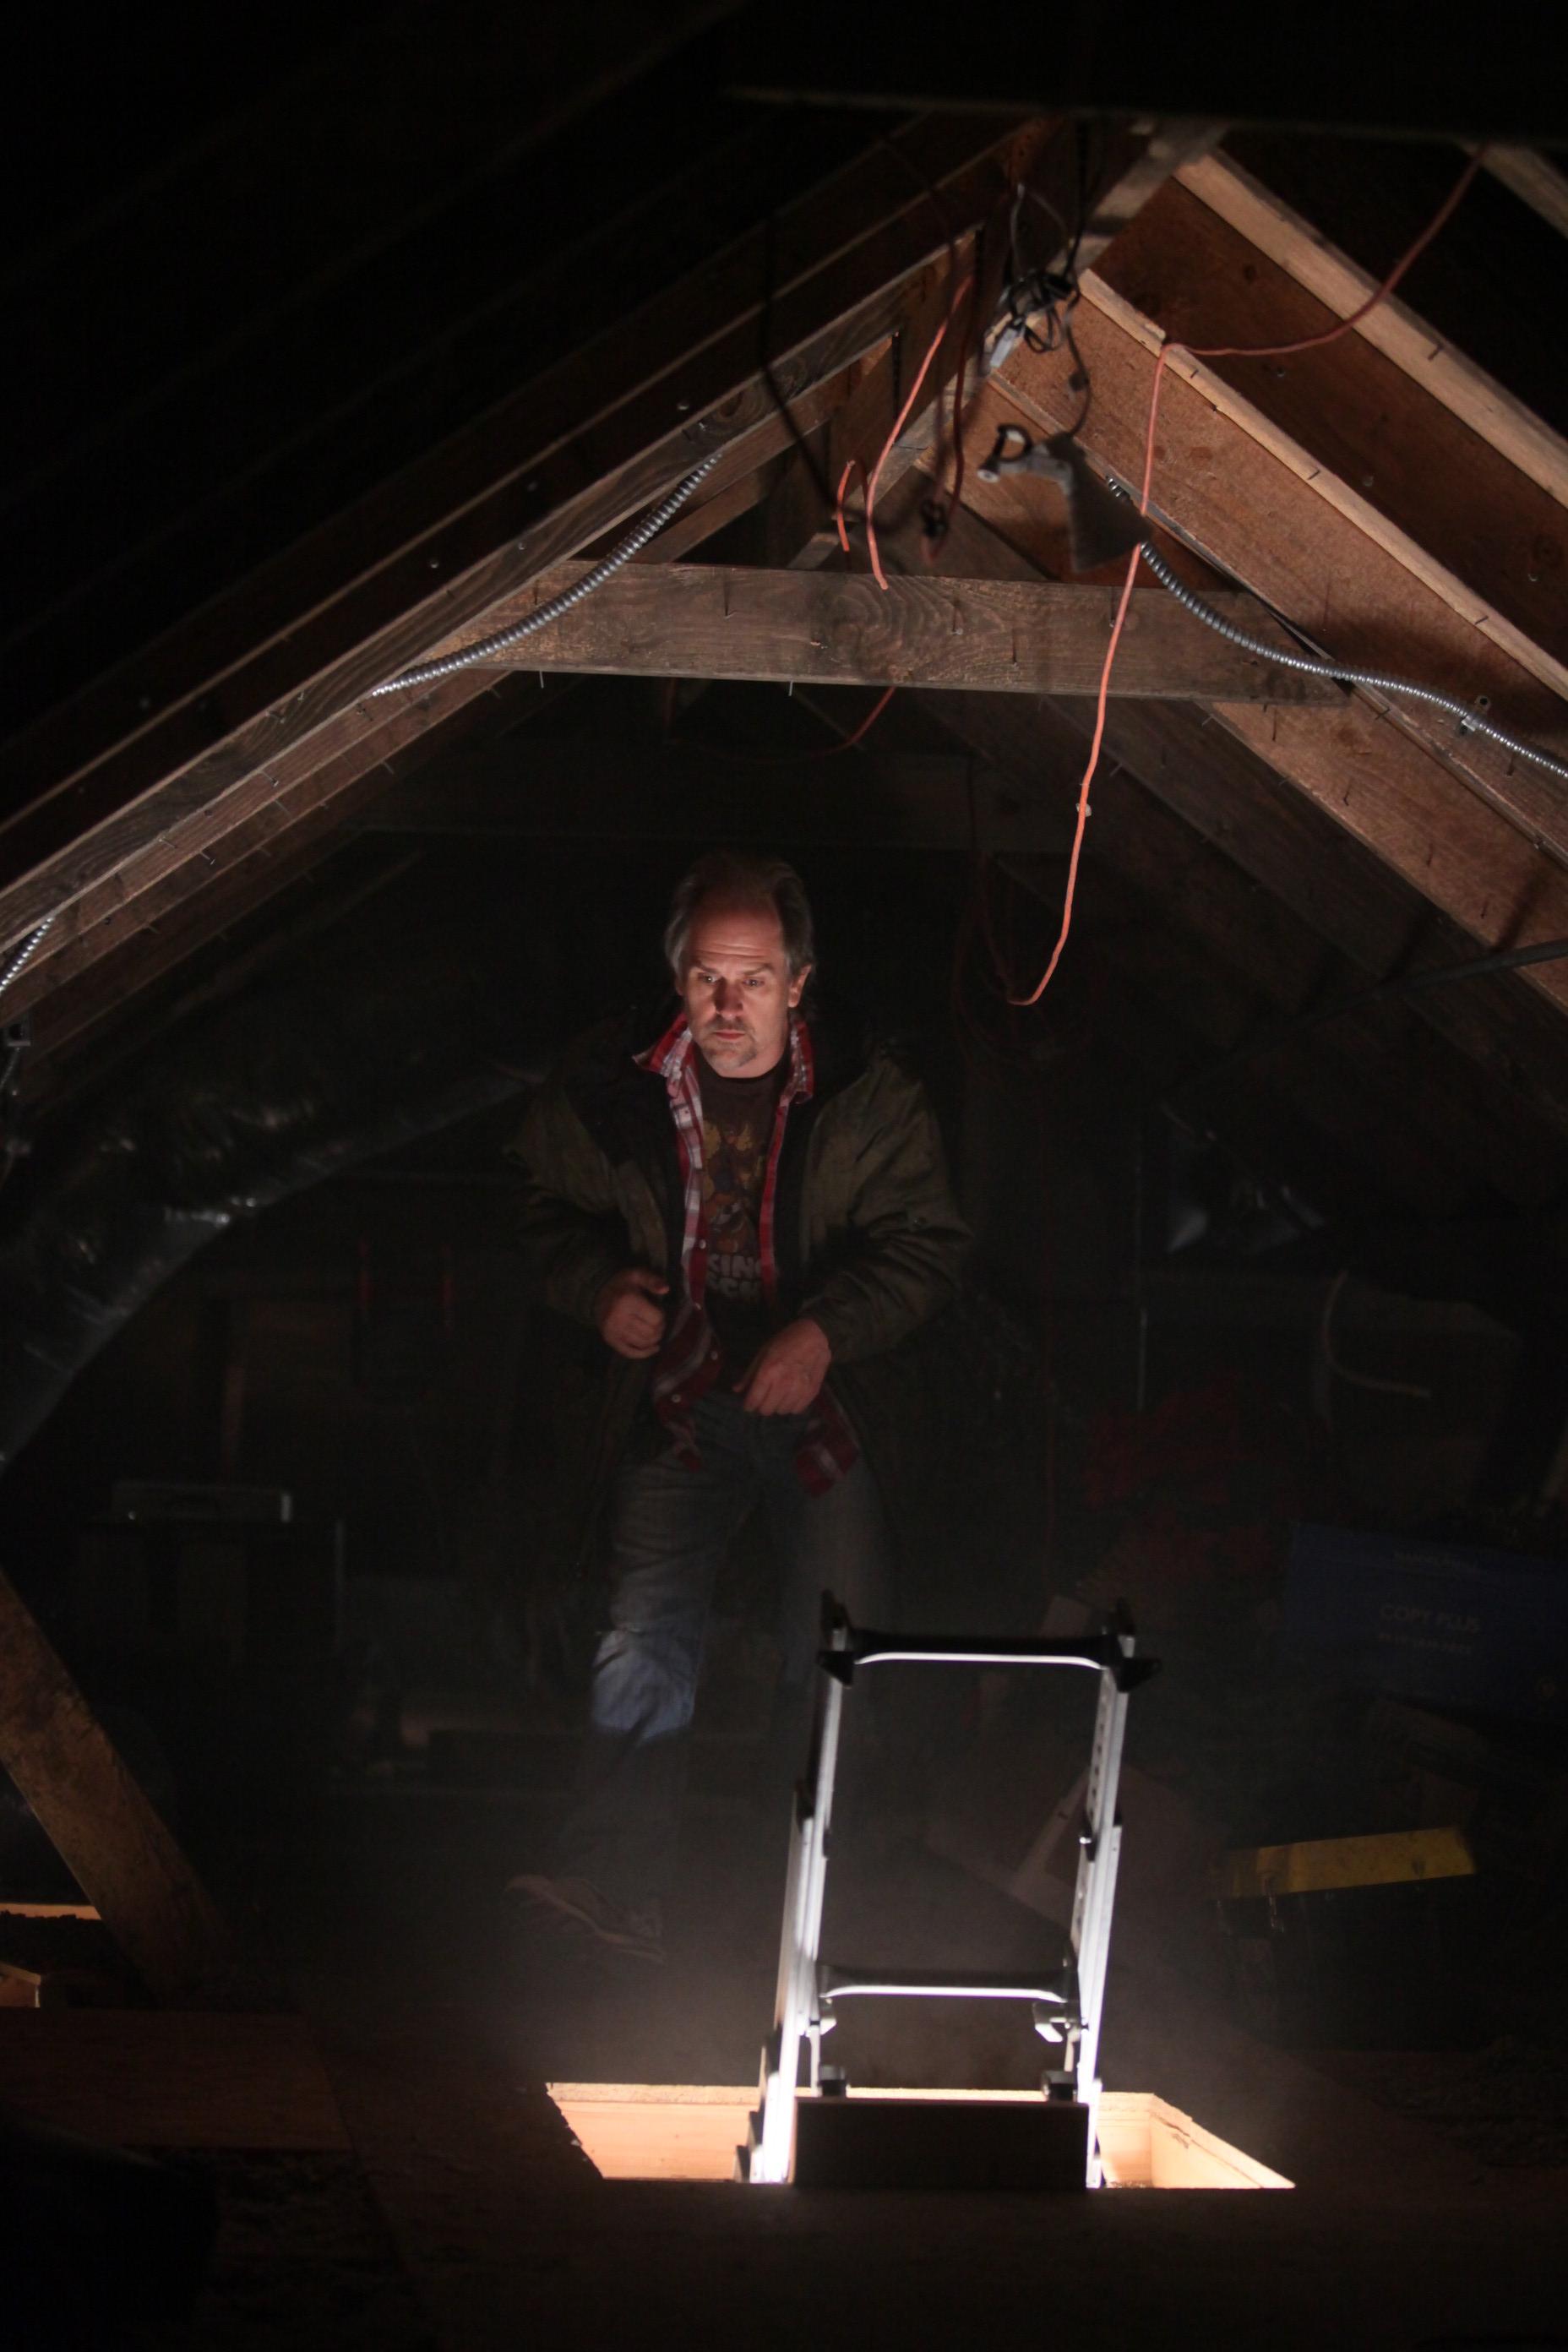 In our attic set on Crawlspace